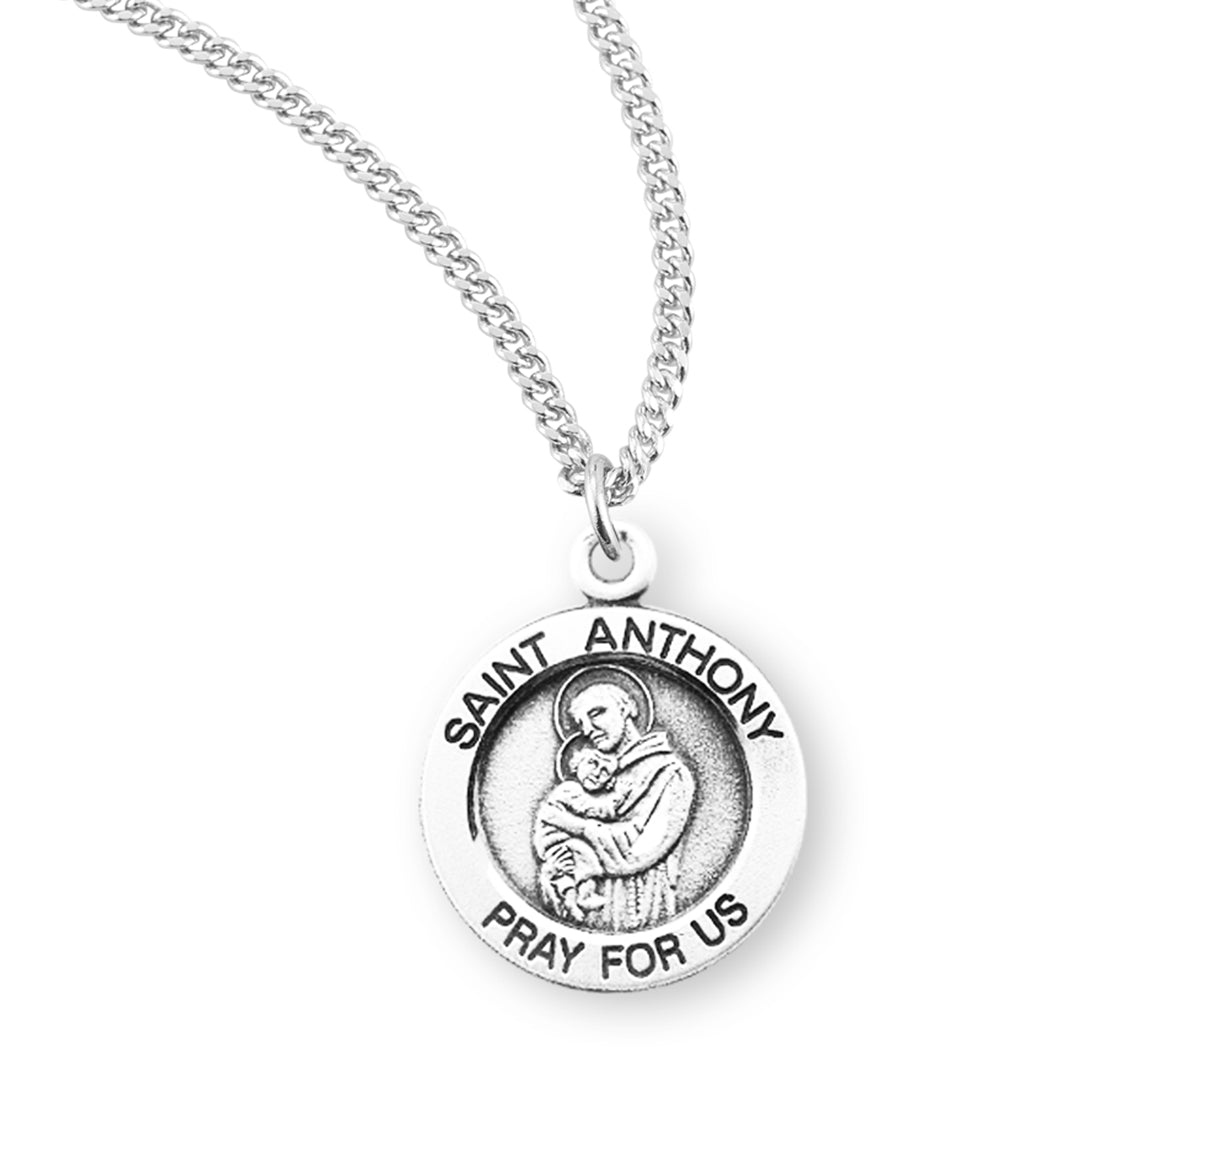 Patron Saint Anthony Round Sterling Silver Medal